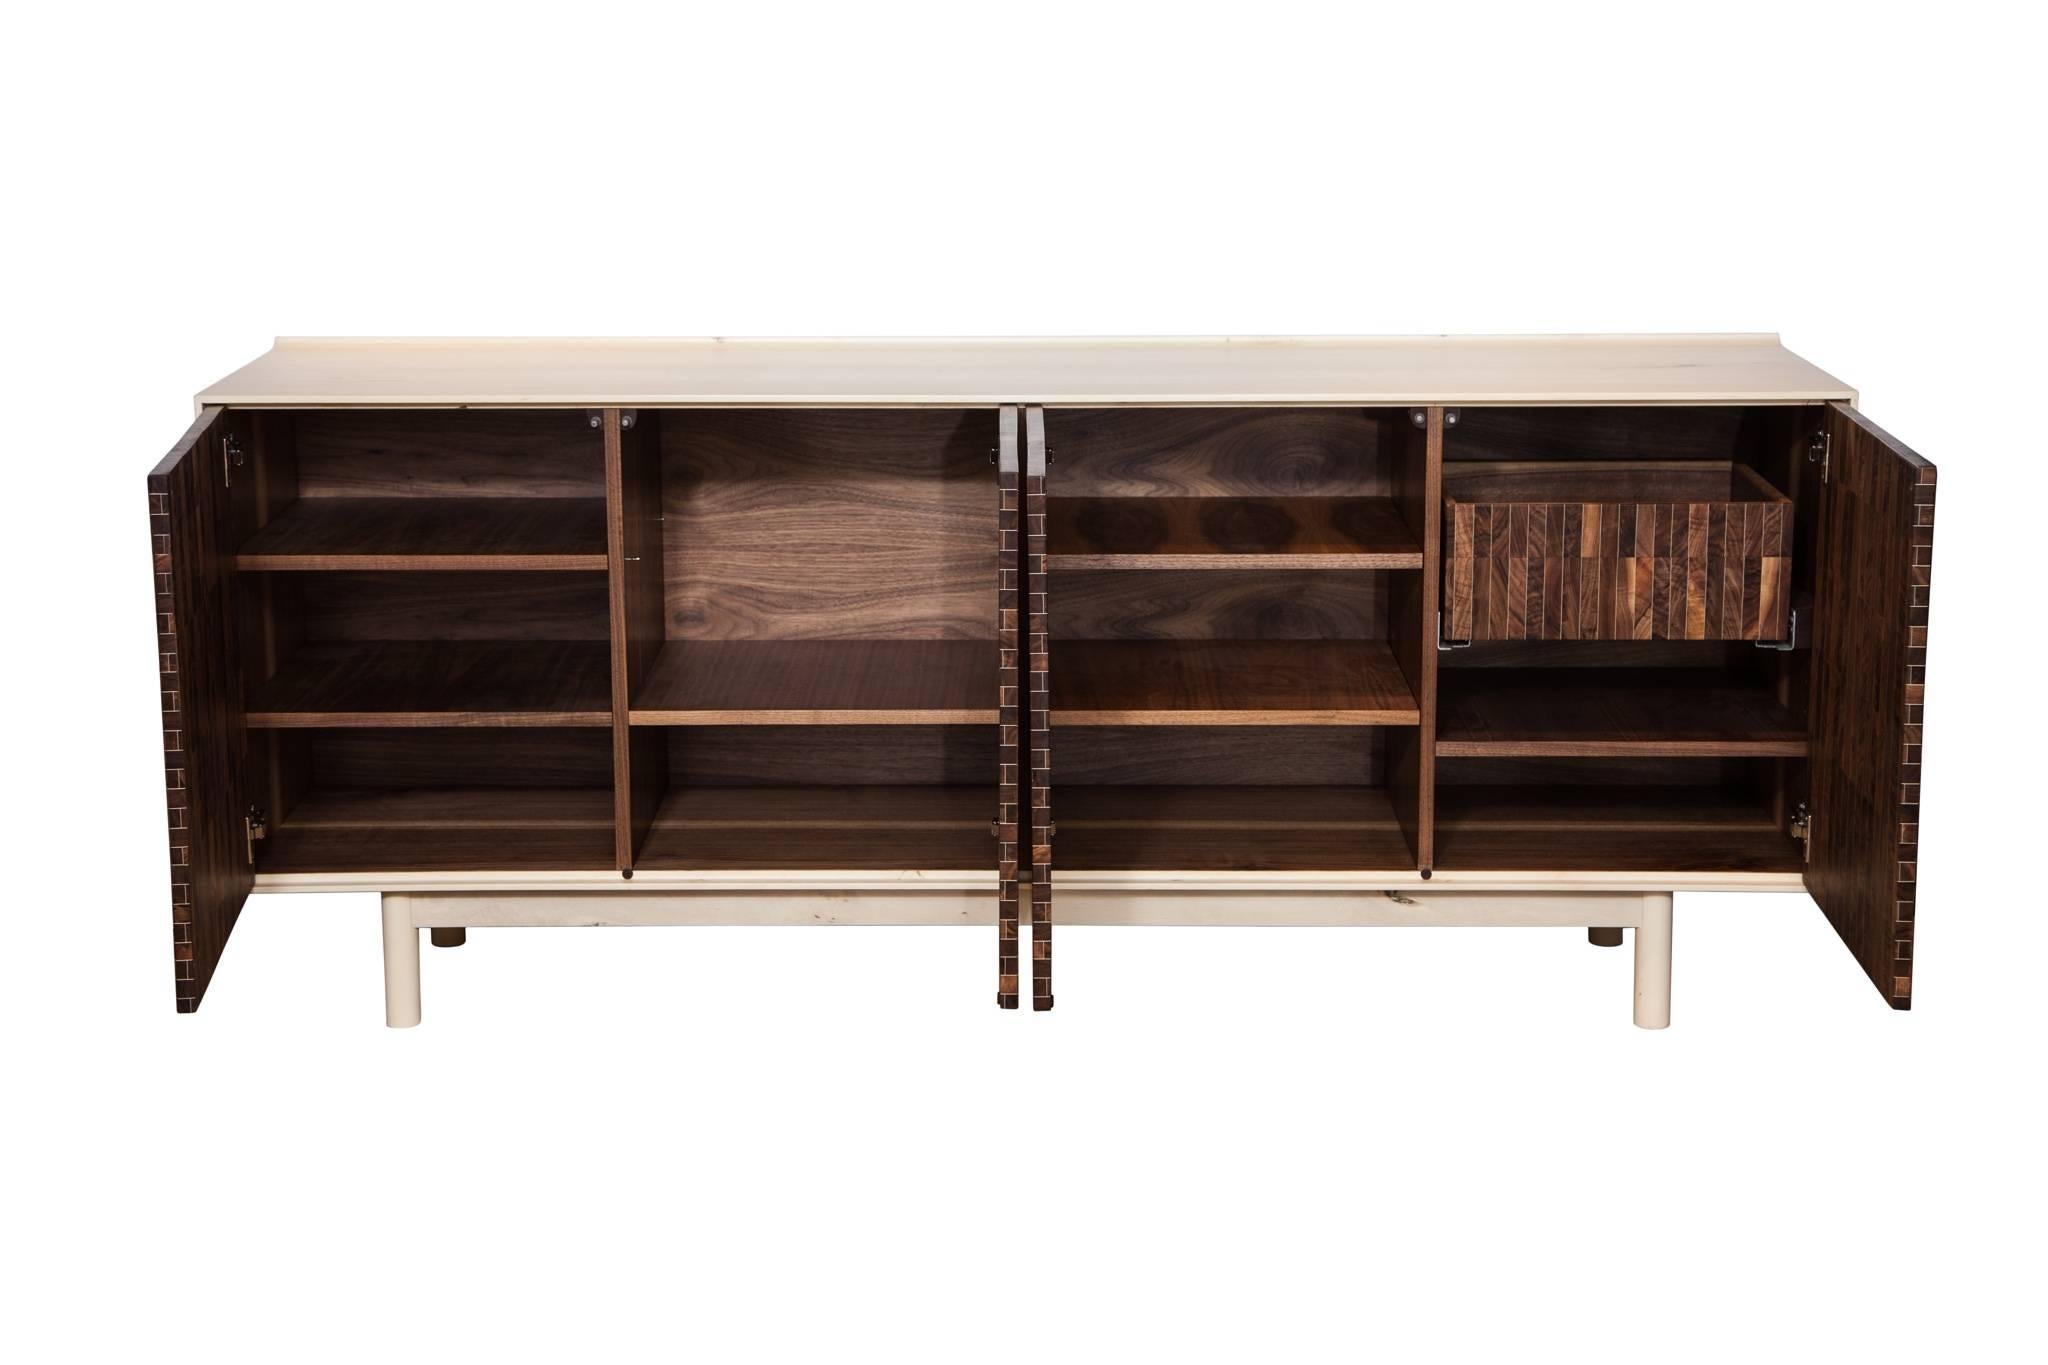 American holly cabinet with Klotzwrk's signature doors. Inset doors are made from crotch walnut blocks segmented by holly veneers.
Credenza can be ordered in custom sizes, wood species and finishes. 
By Klotzwrk.

Custom orders have a lead time